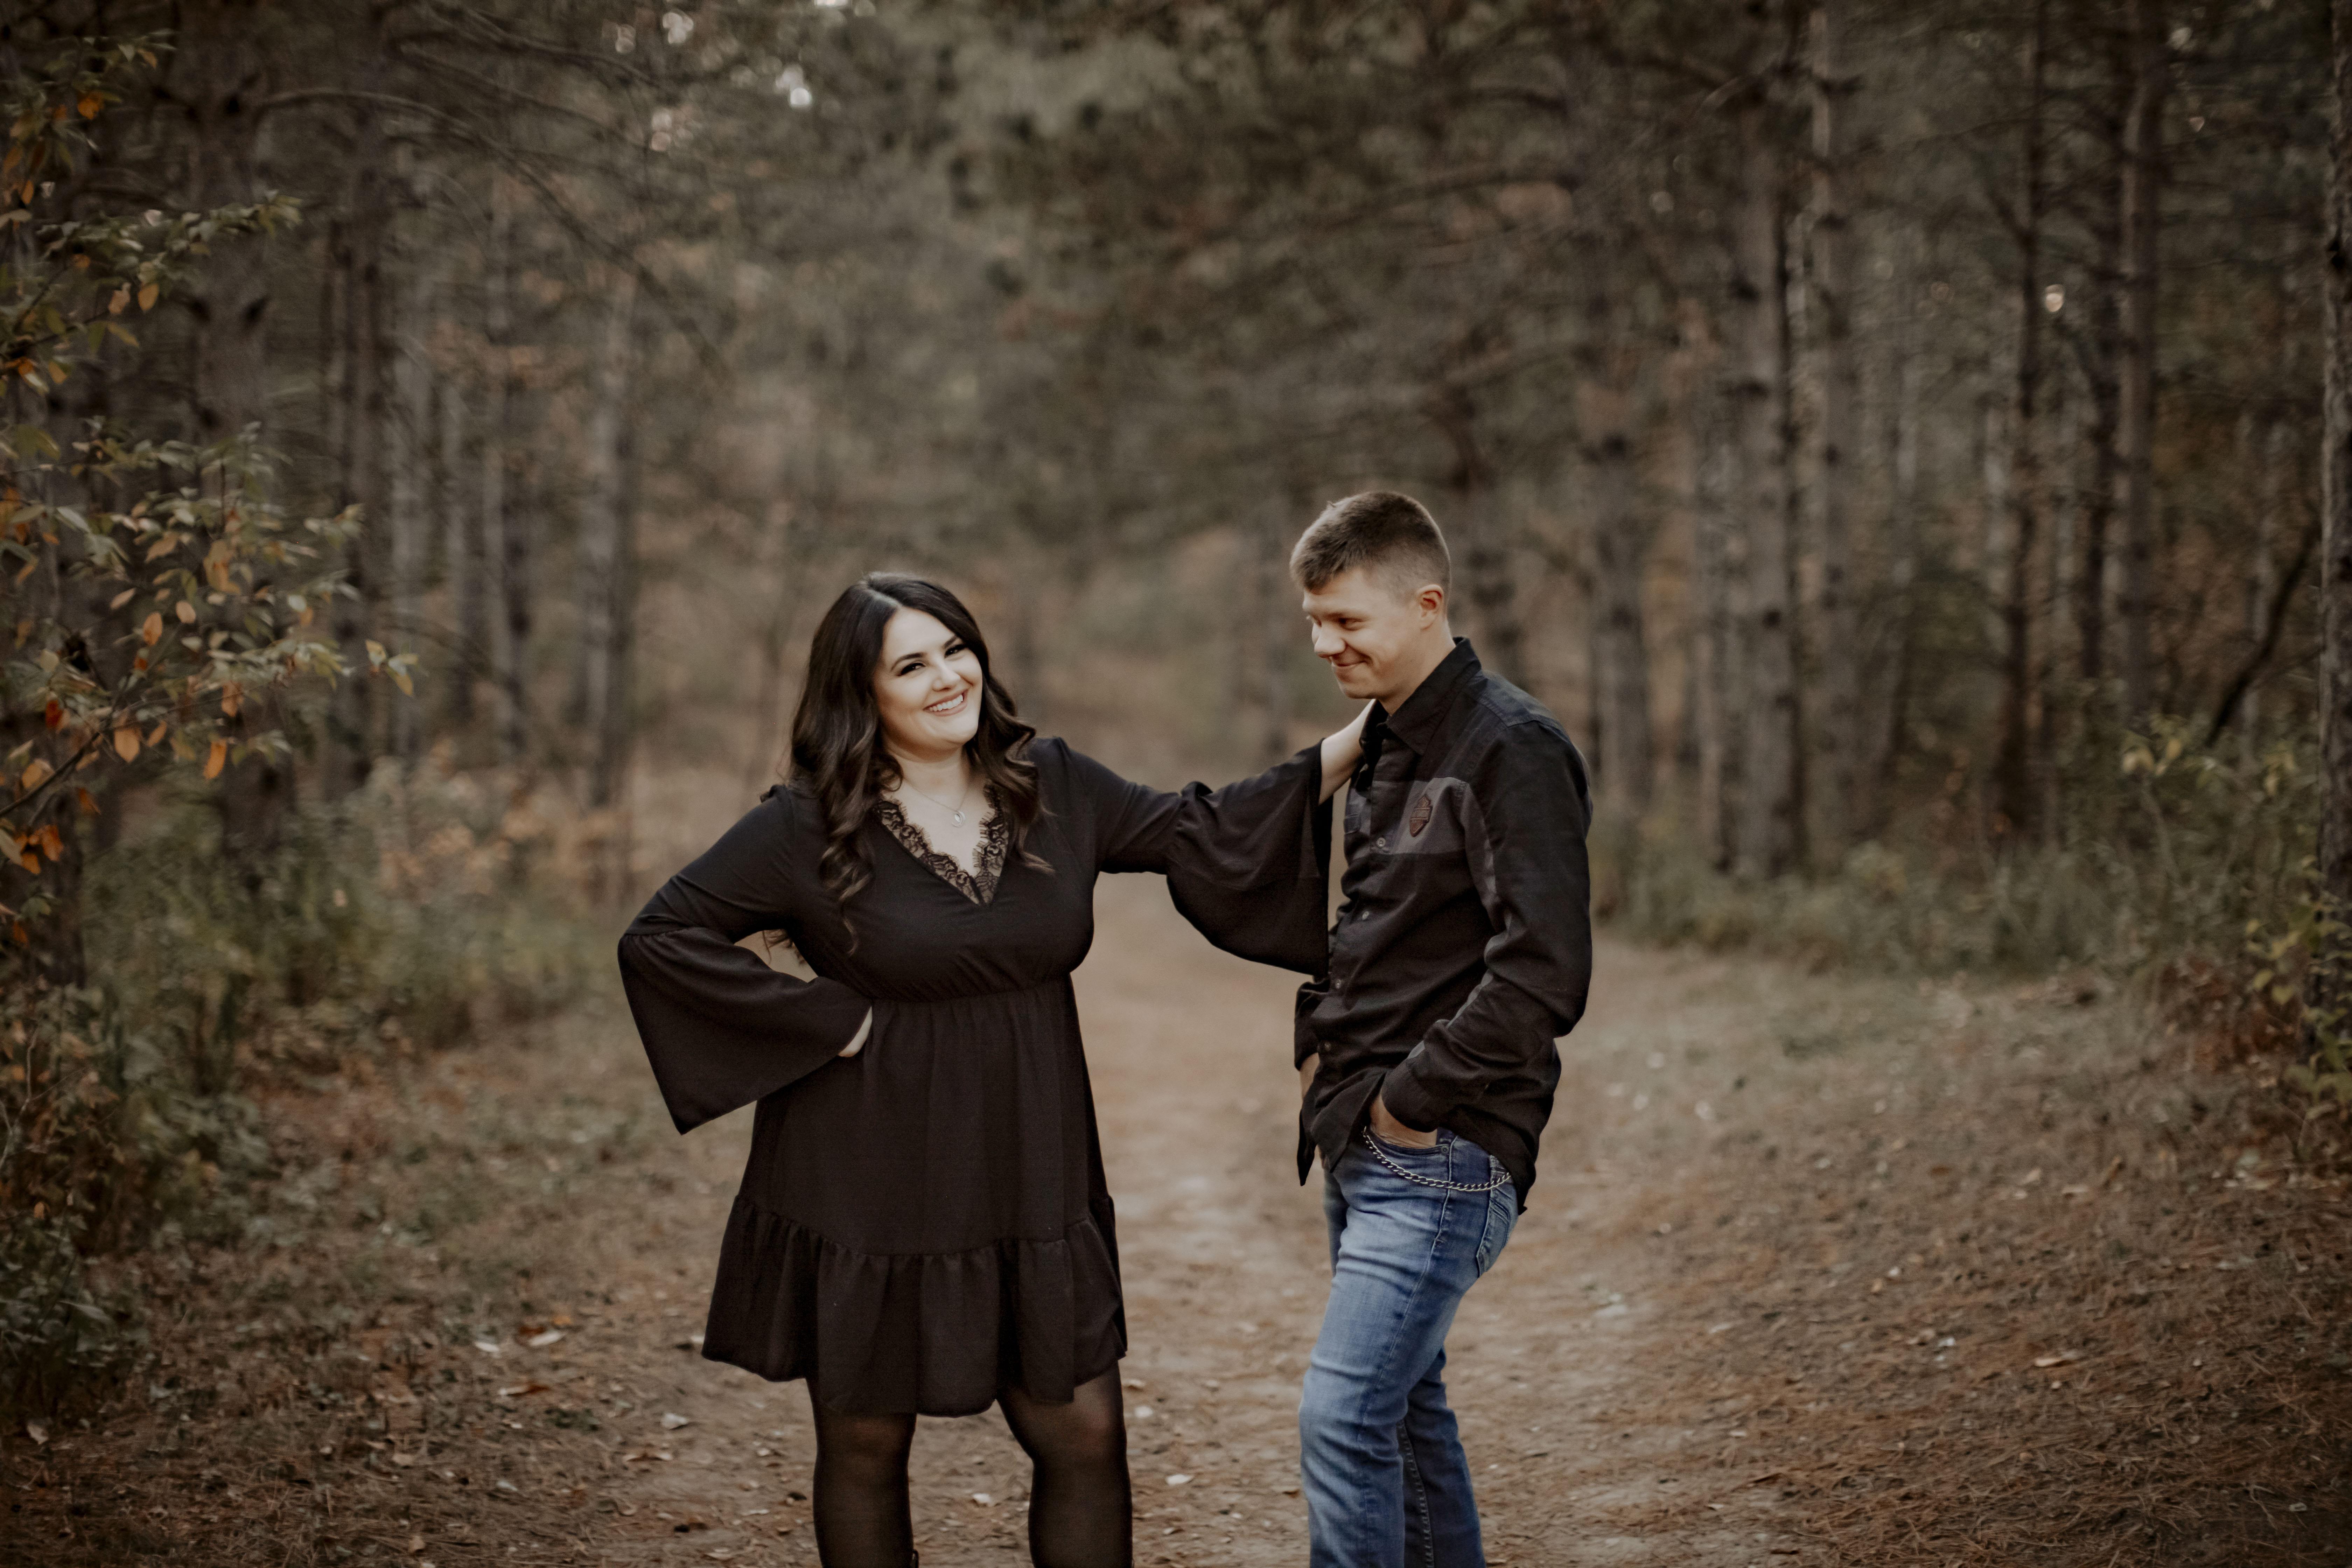 The Wedding Website of Kaitlynn Wallace and Christian Reiter